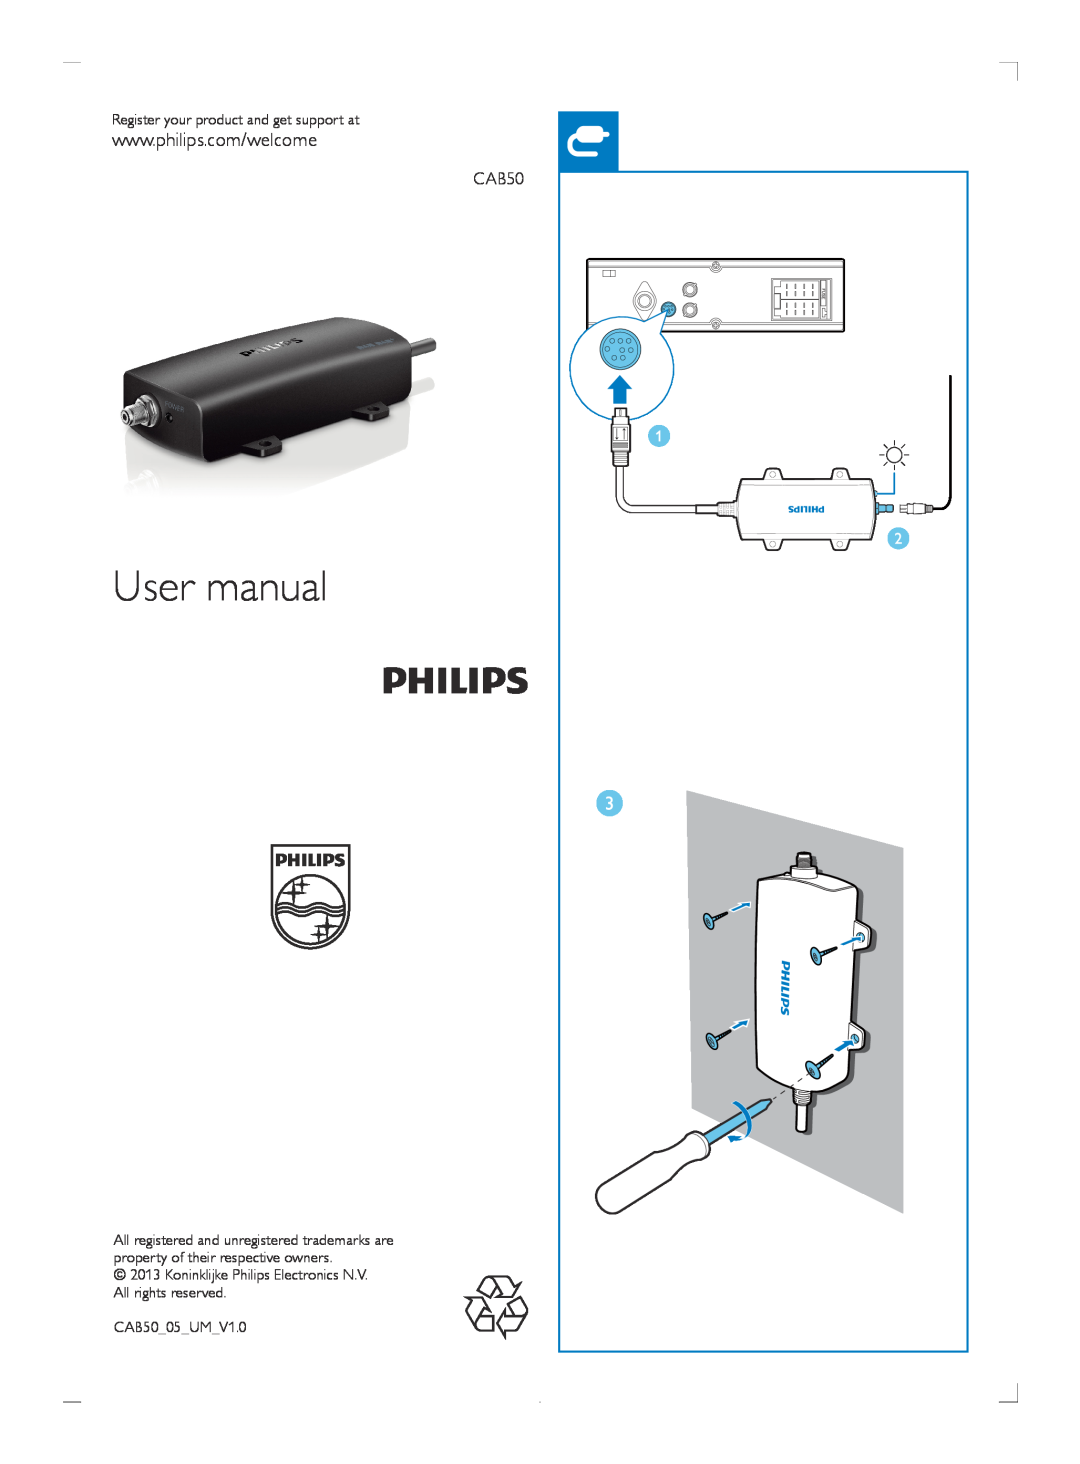 Philips user manual Register your product and get support at, CAB50 05 UM 